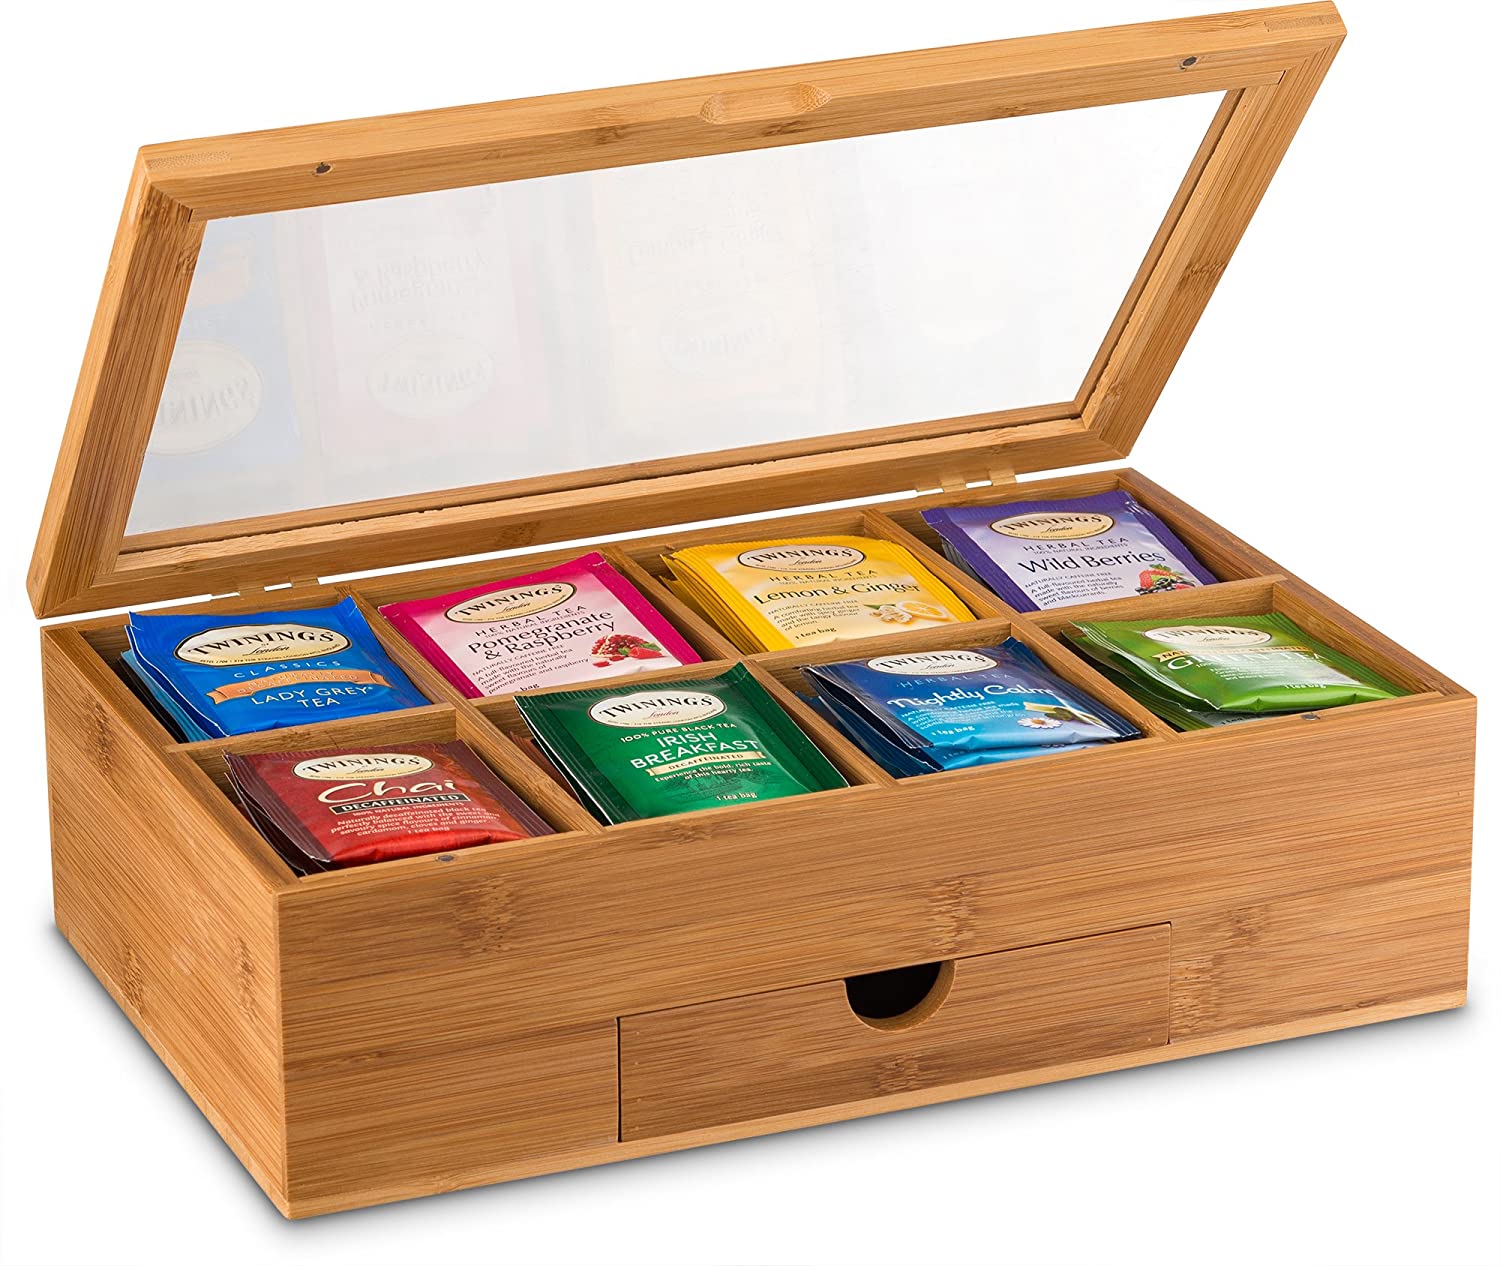 Bamboo 8-Section Tea Storage Box with Clear Lid by Trademark Innovations